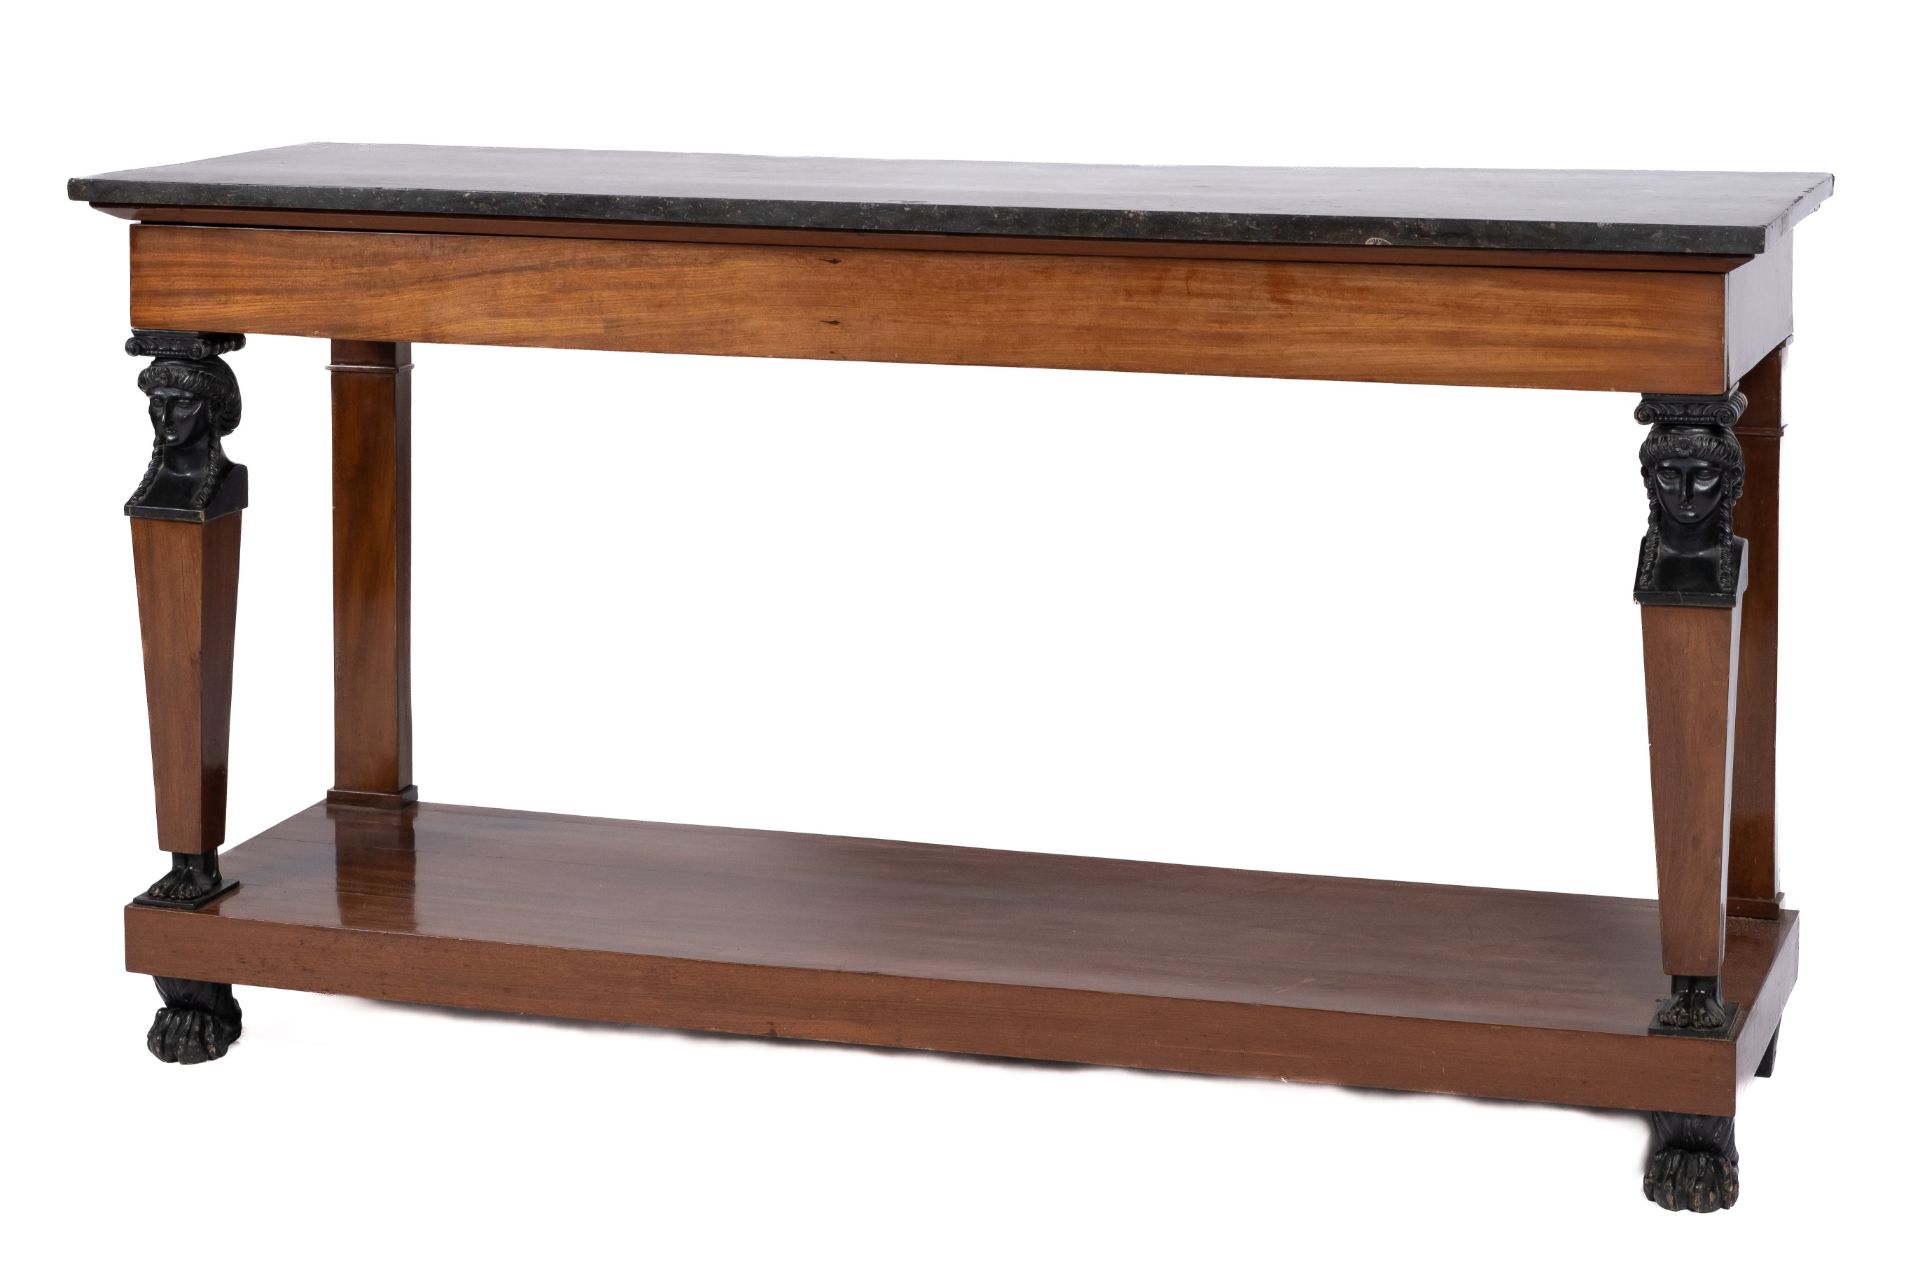 A large Dutch mahogany and ebonised console table